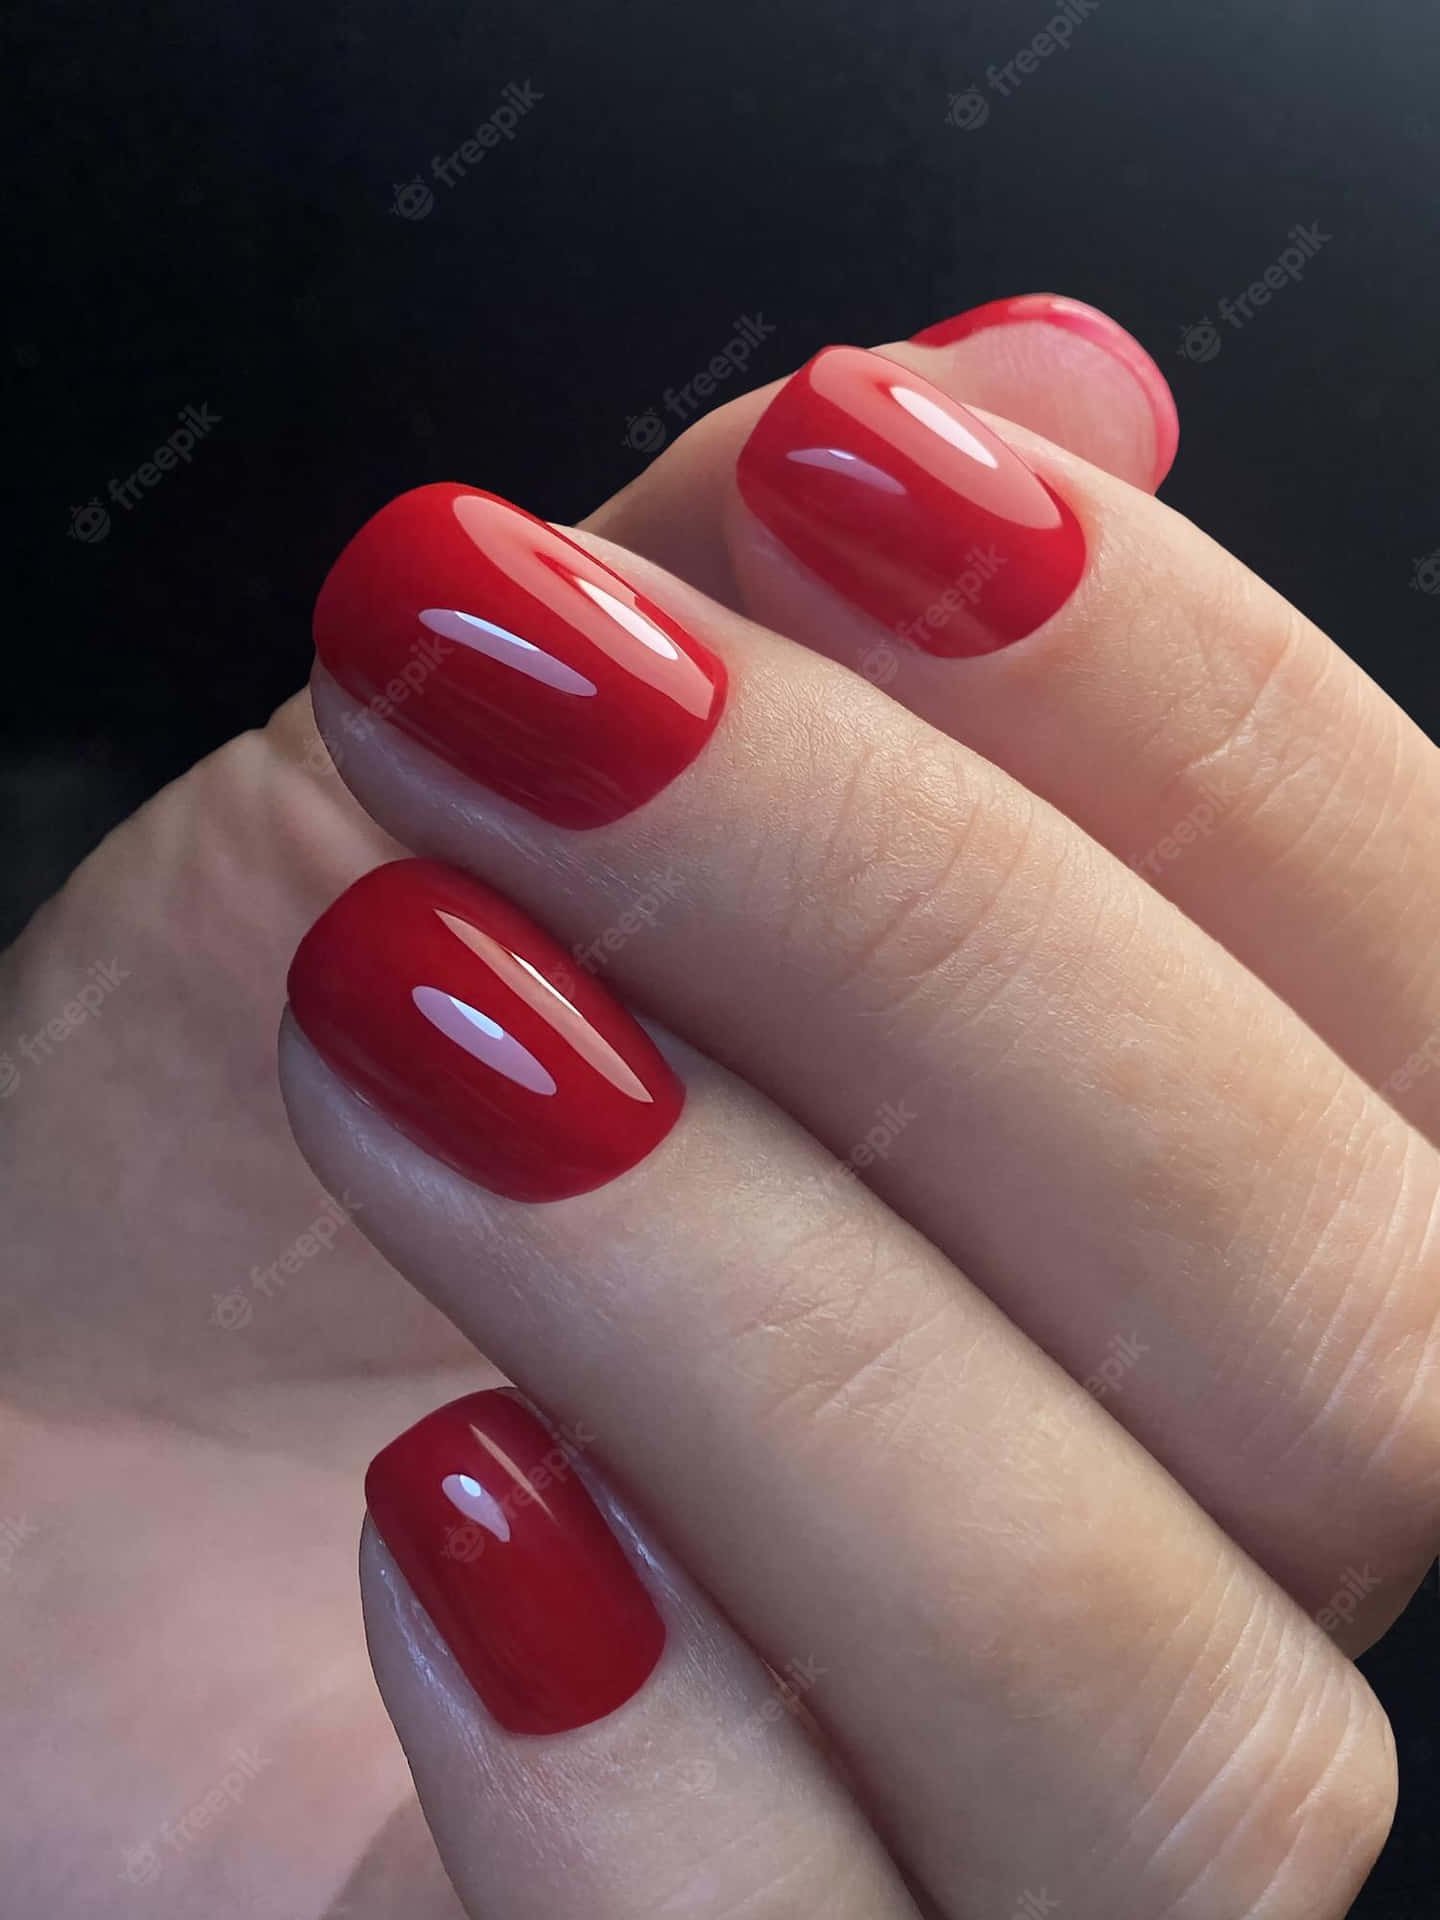 A Woman's Hand Holding A Red Nail Polish Wallpaper